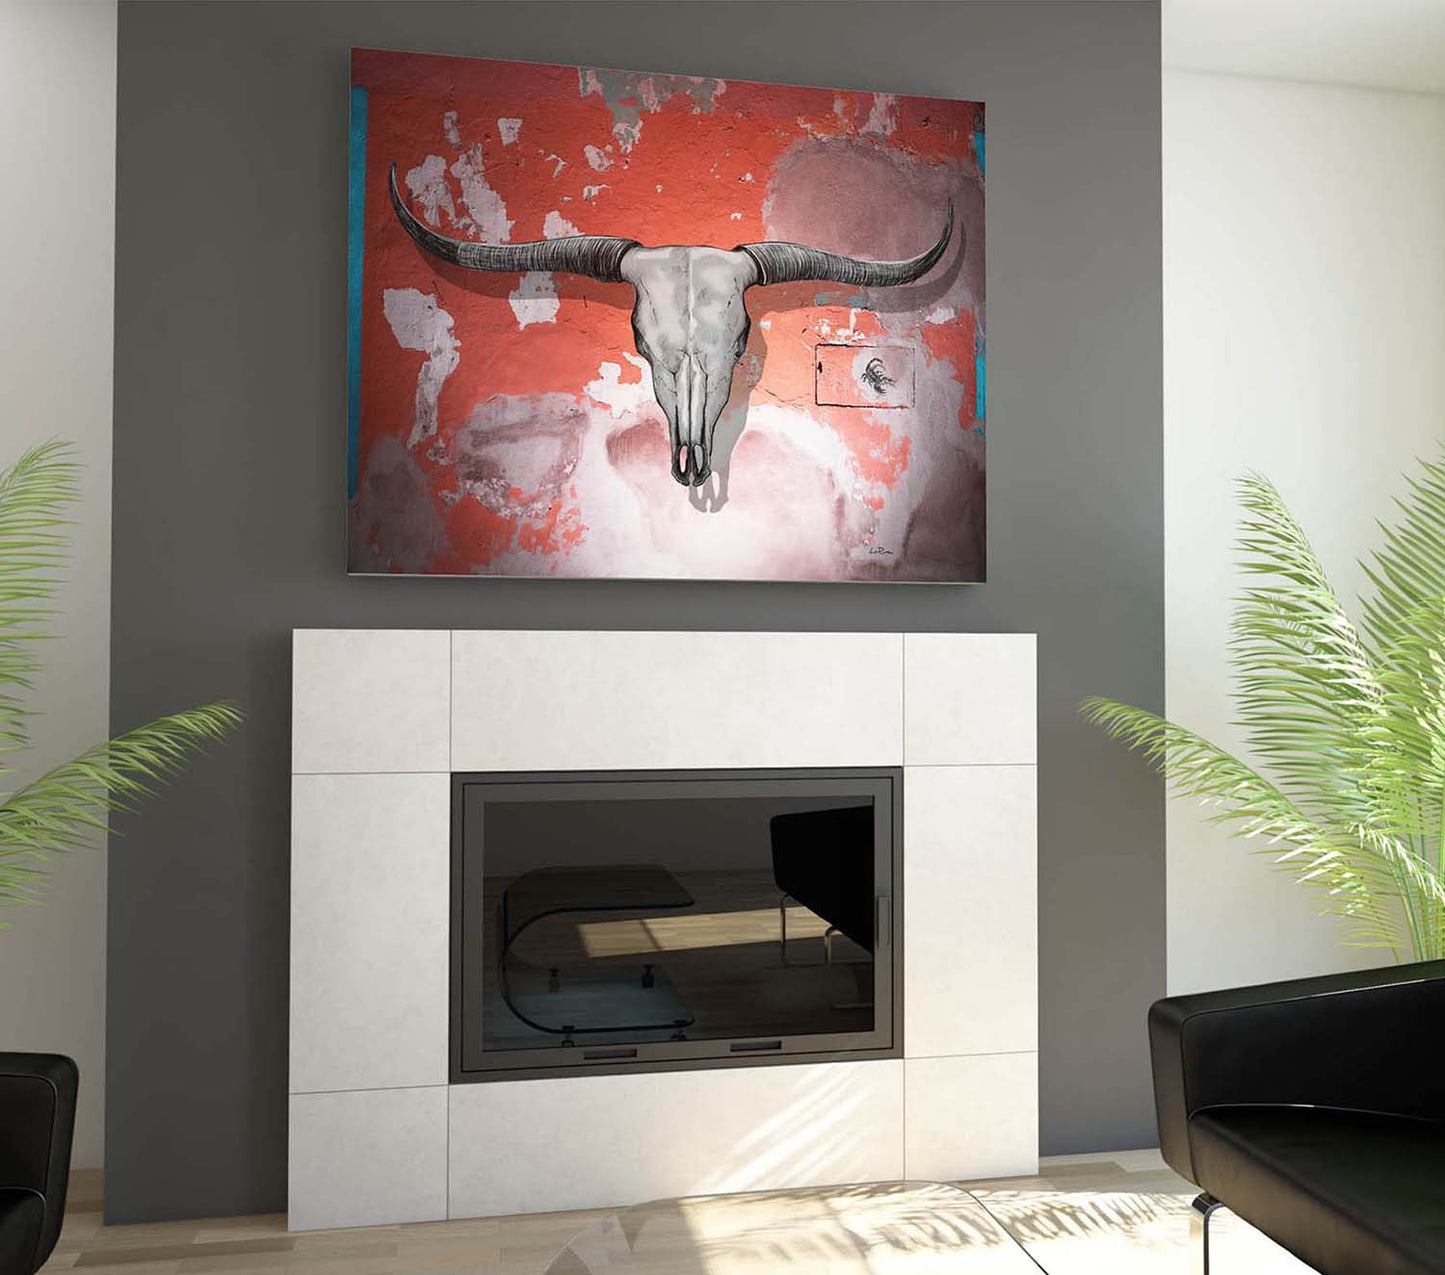 Longhorn Skull and Scorpion on a distressed pale tangerine wall hung over a modern fire place